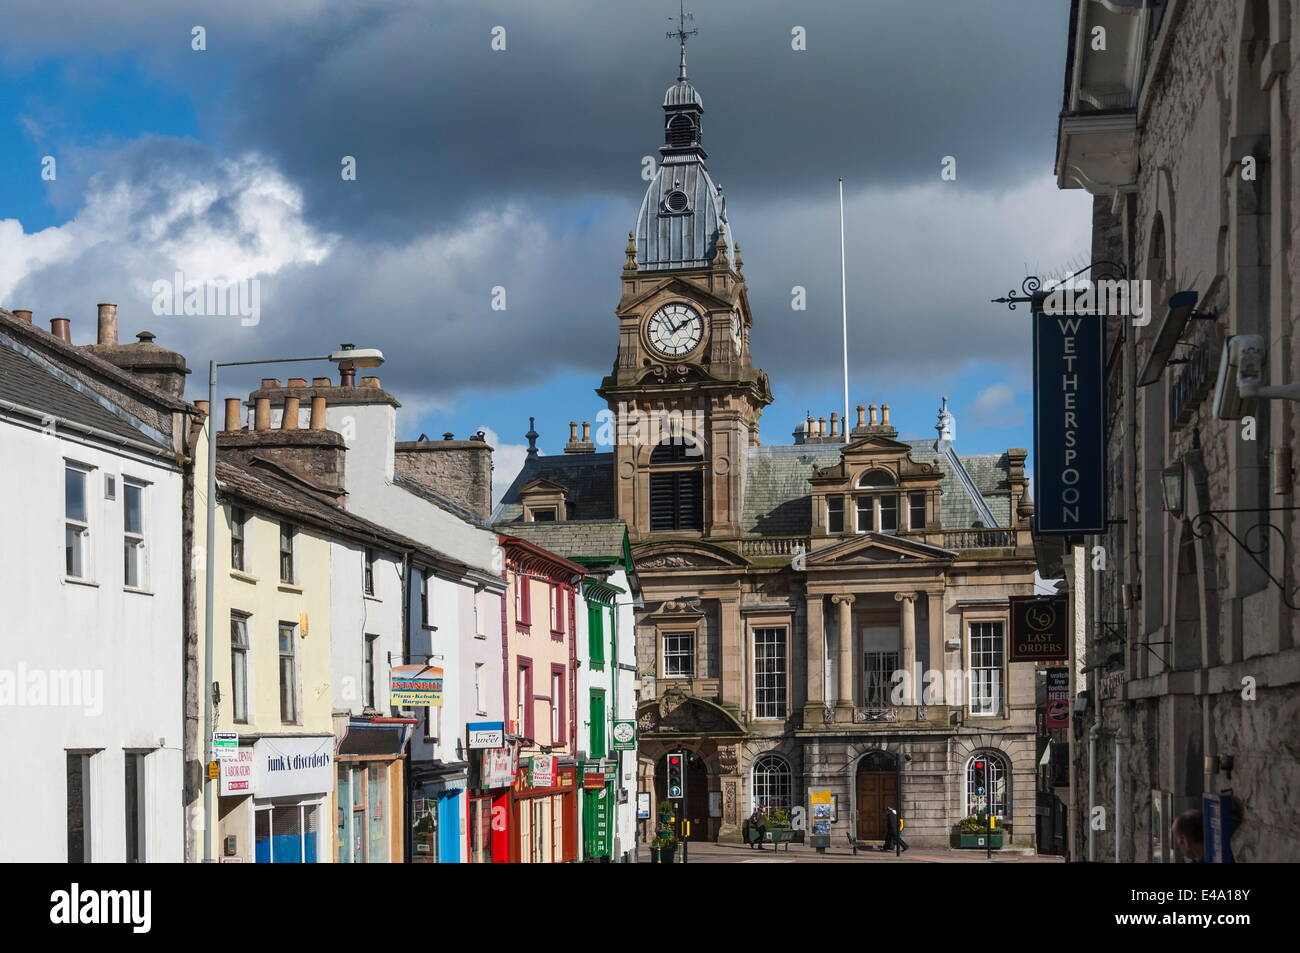 Town Hall from Allhallows Lane, Kendal, South Lakeland, Cumbria, England, United Kingdom, Europe Stock Photo